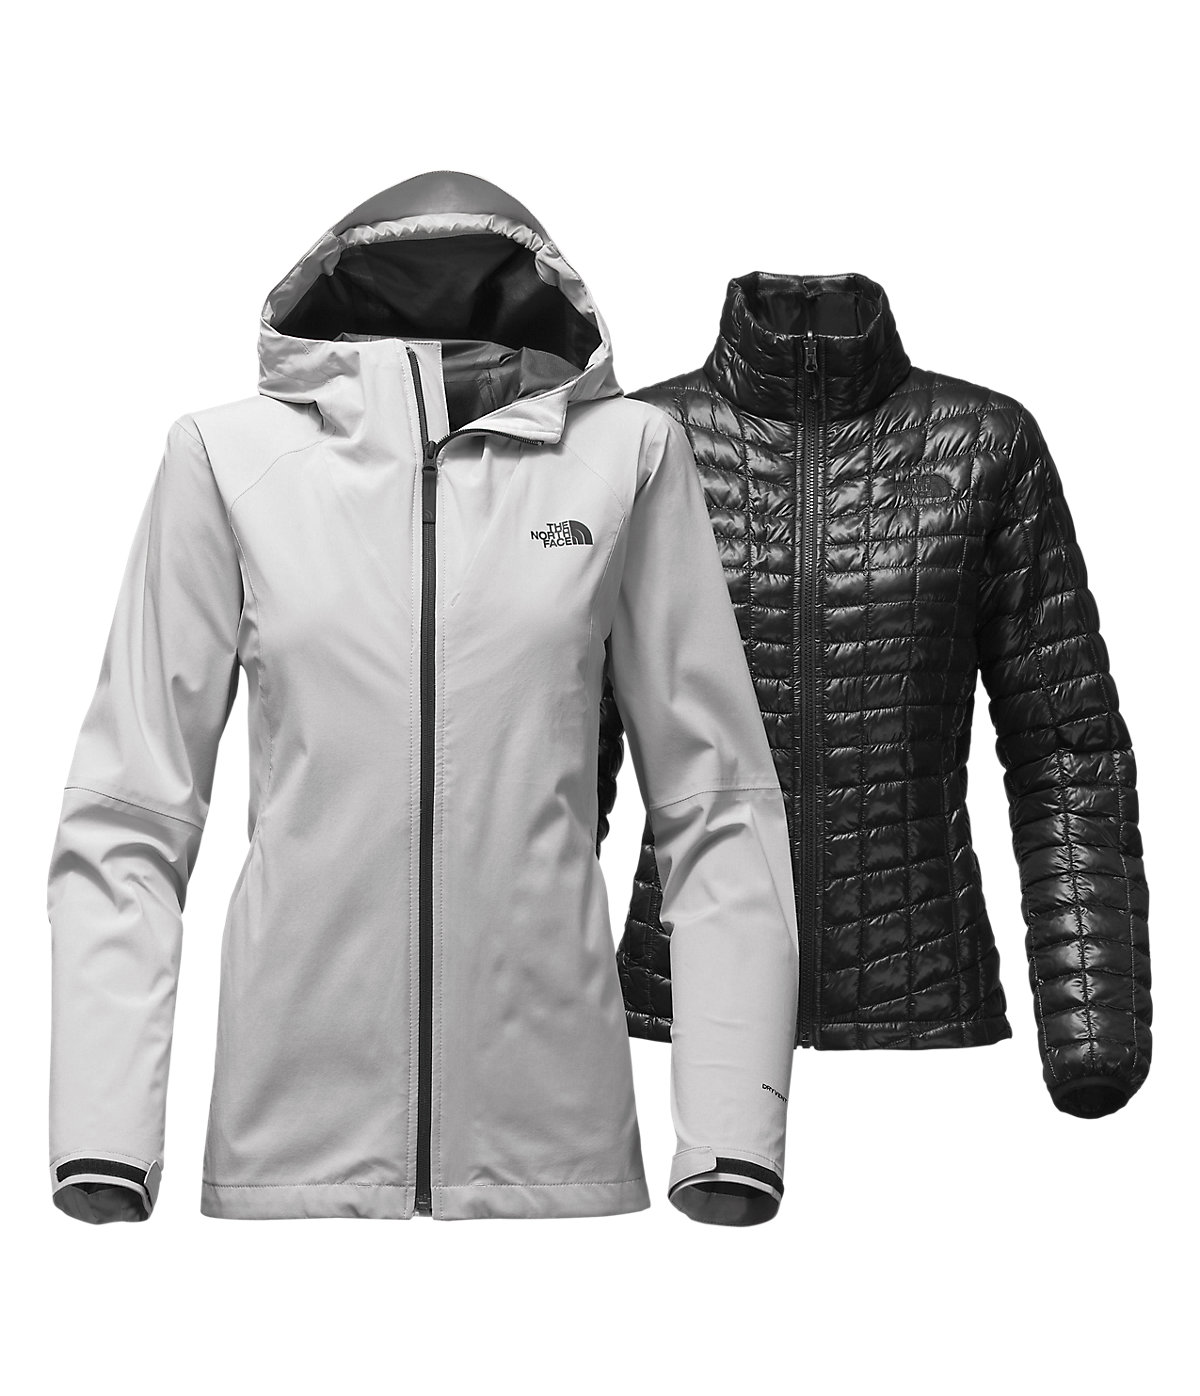 women's thermoball triclimate jacket